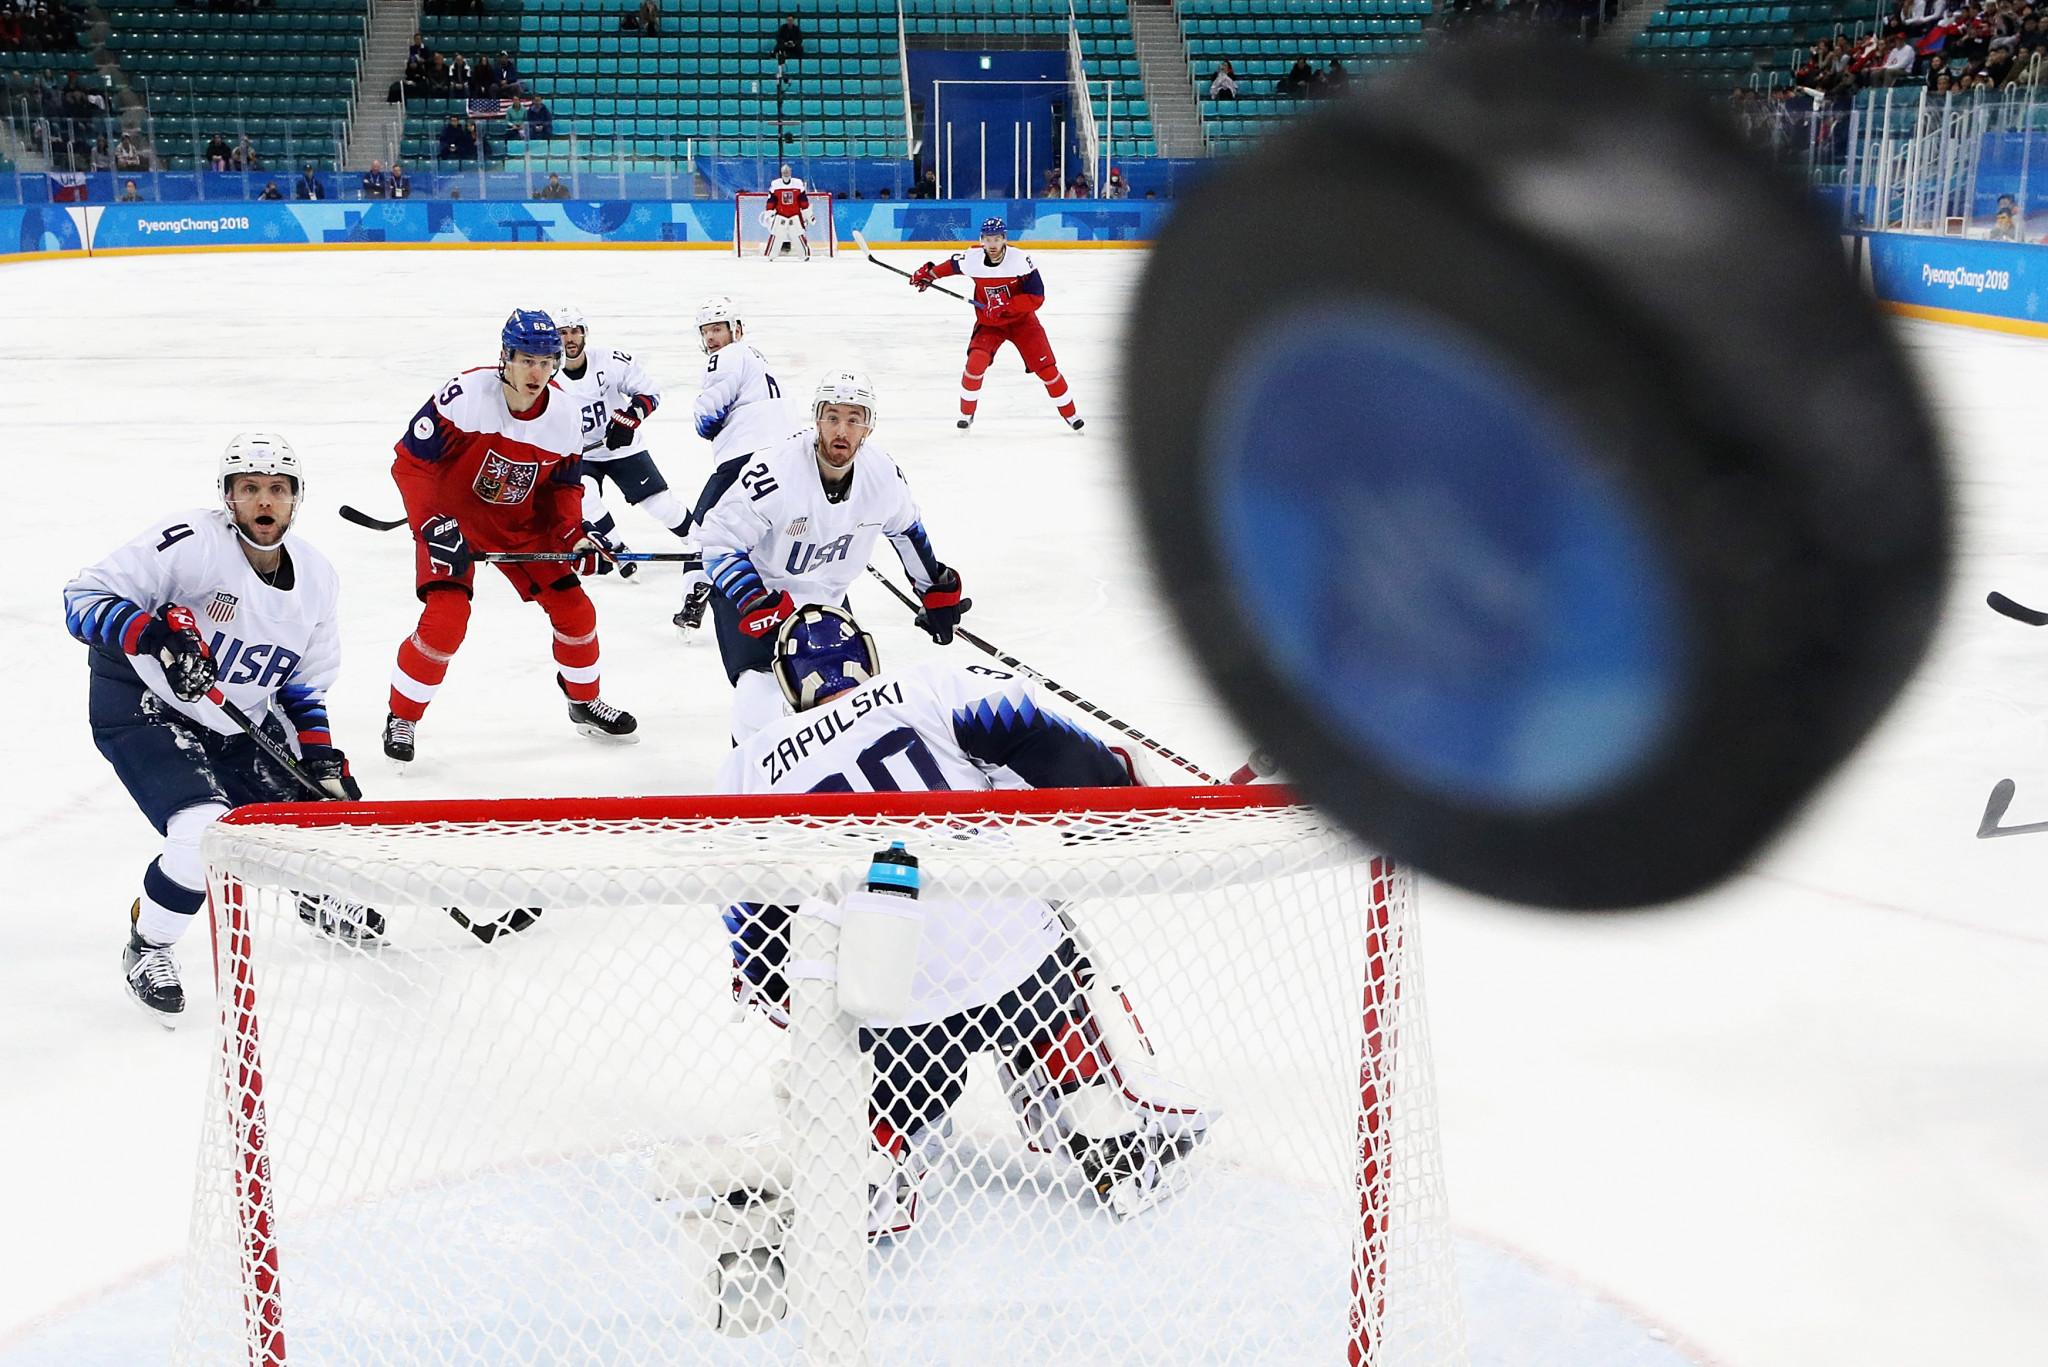 An incredible photograph reveals an ice hockey puck at close range ©Getty Images